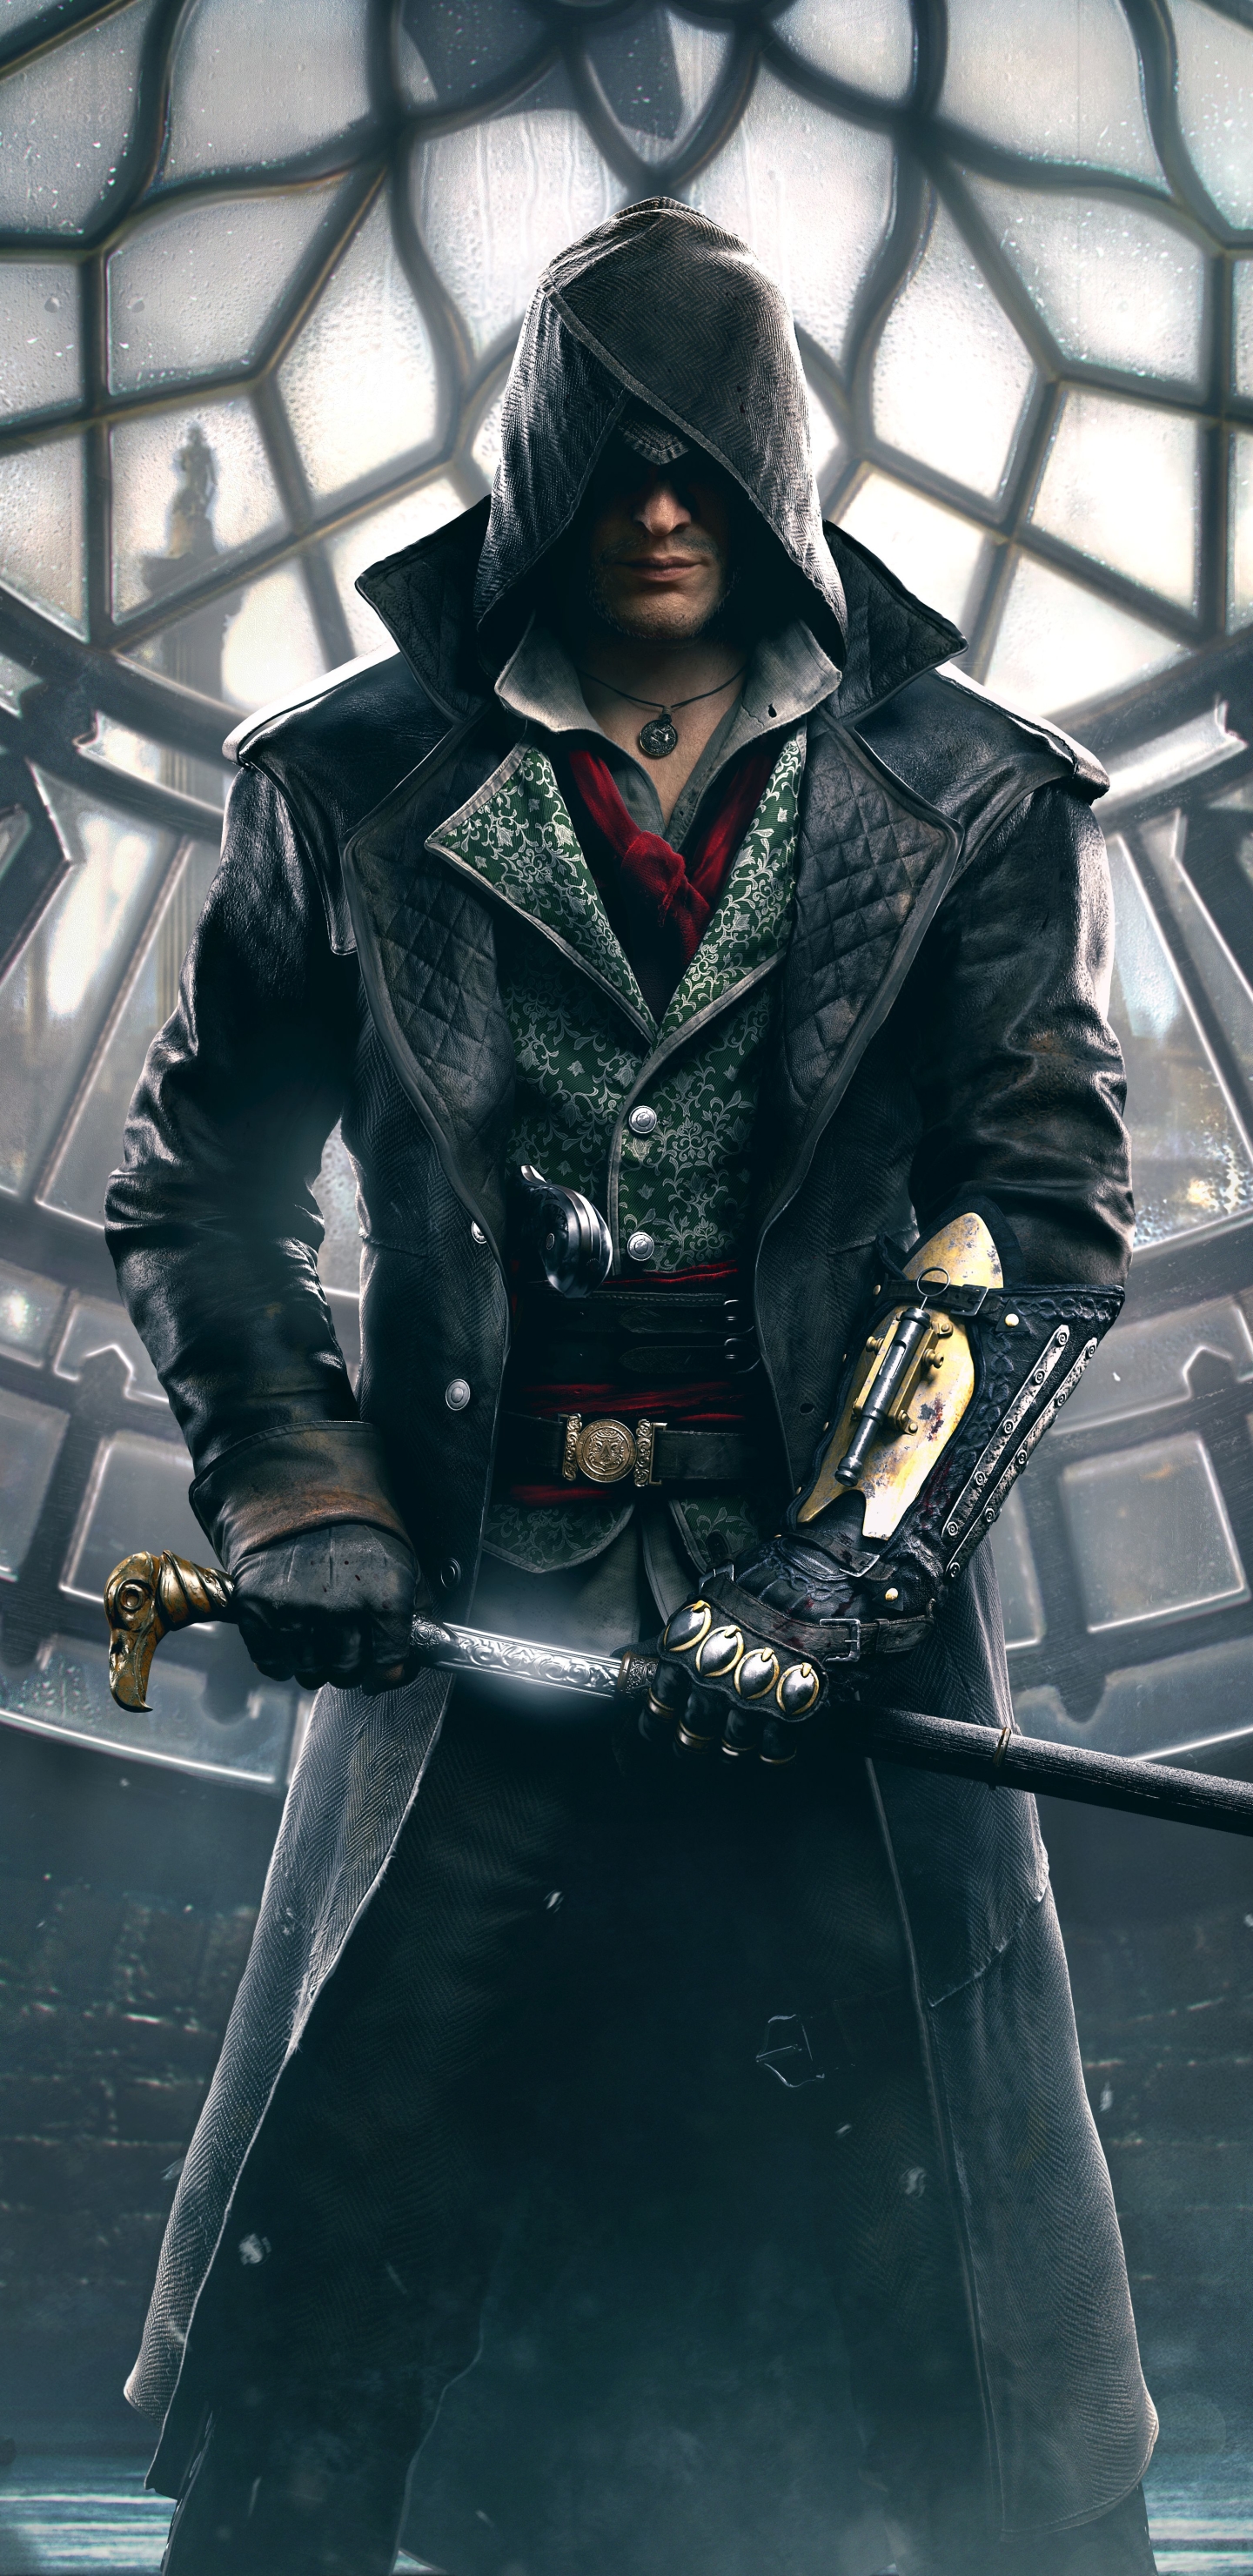 video game, assassin's creed: syndicate, jacob frye, assassin's creed images